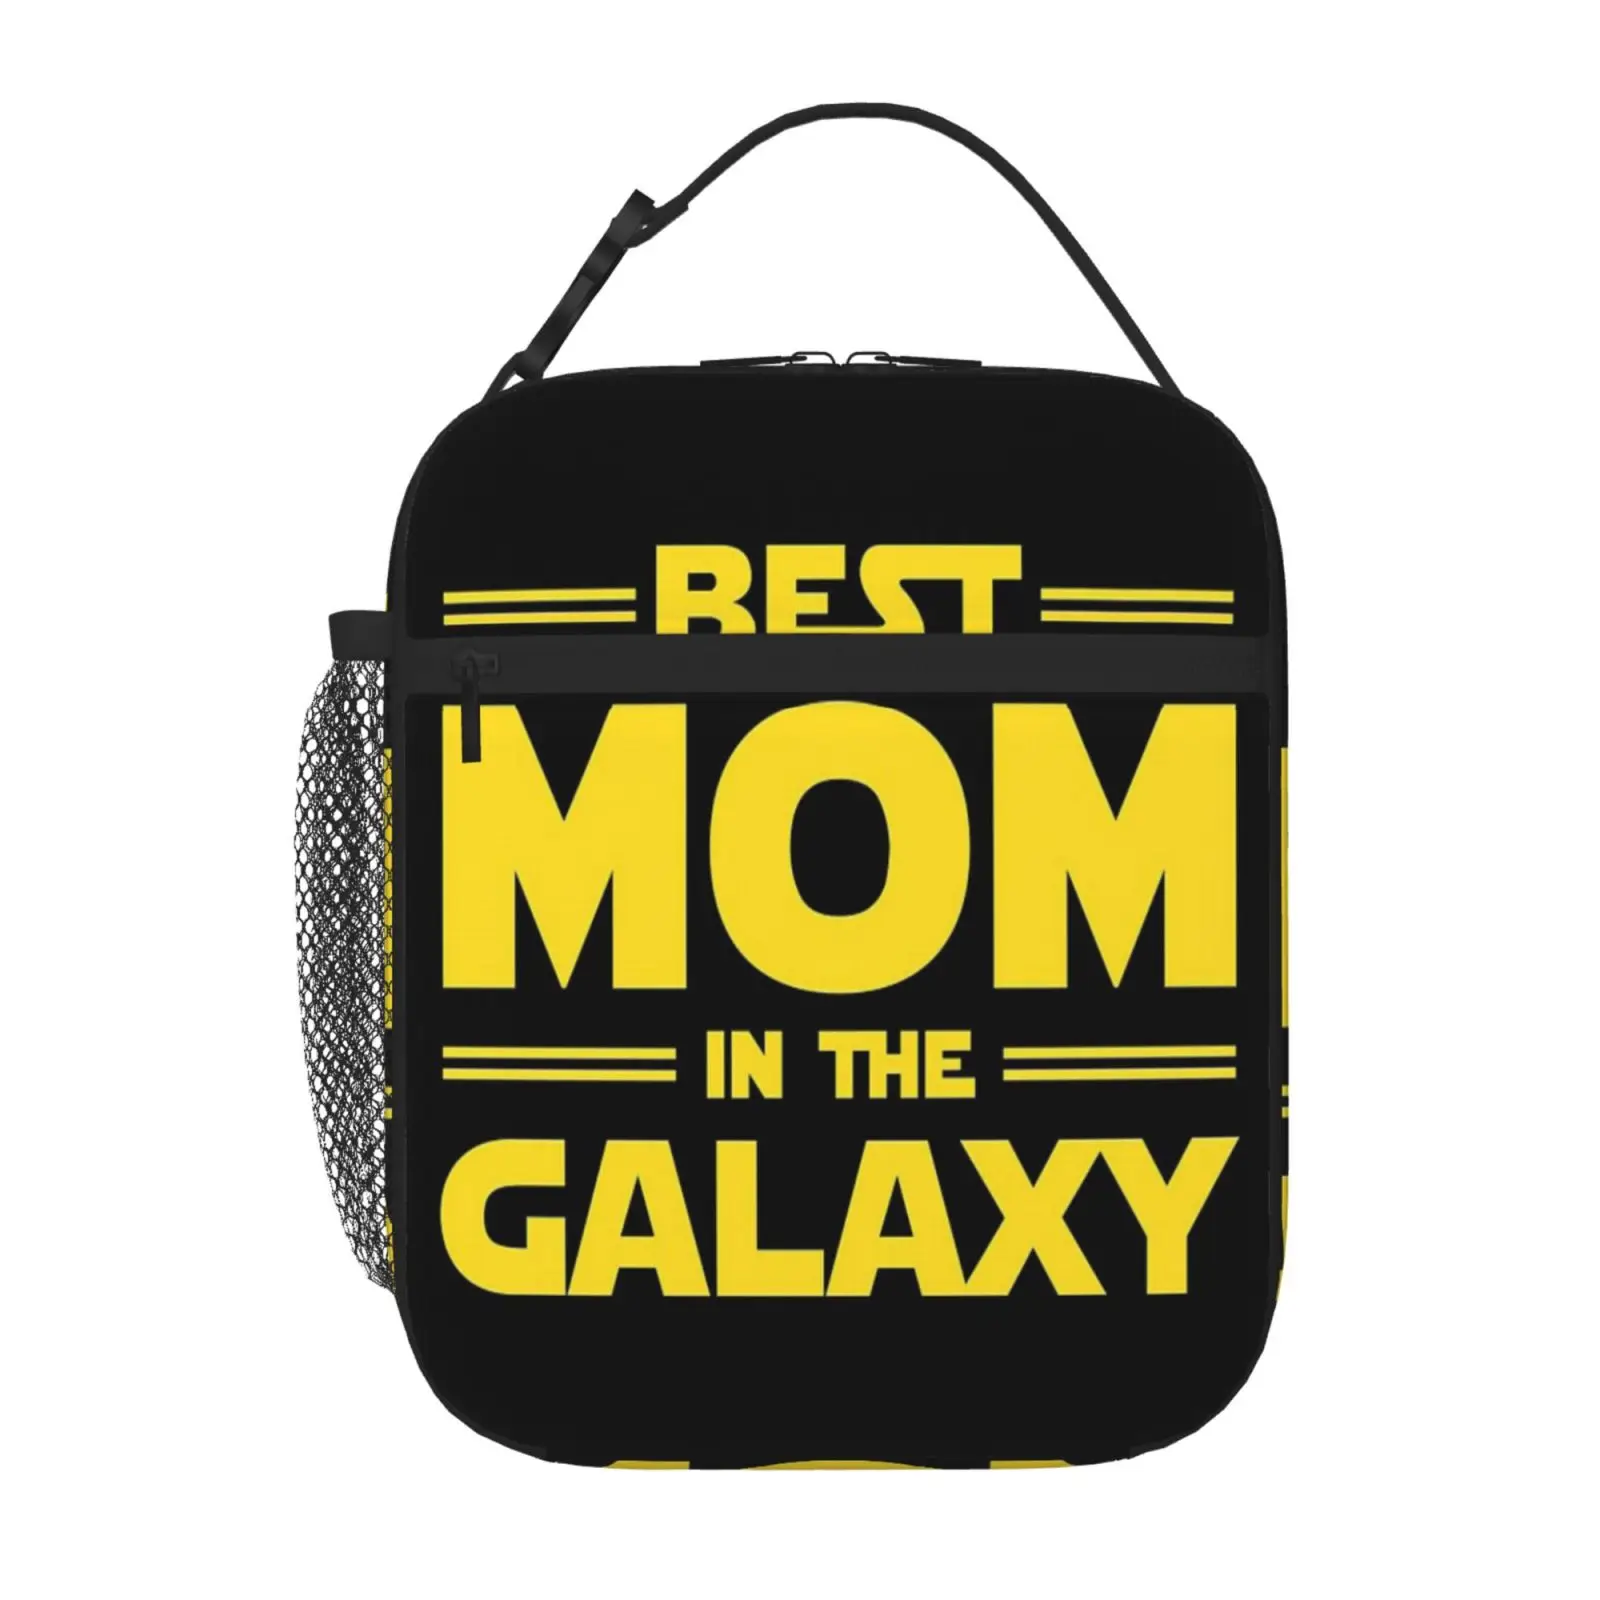 

Best Mom In The Galaxy Packed Lunch Insulated Lunch Box Thermal Fridge Bag Thermal Bag Female